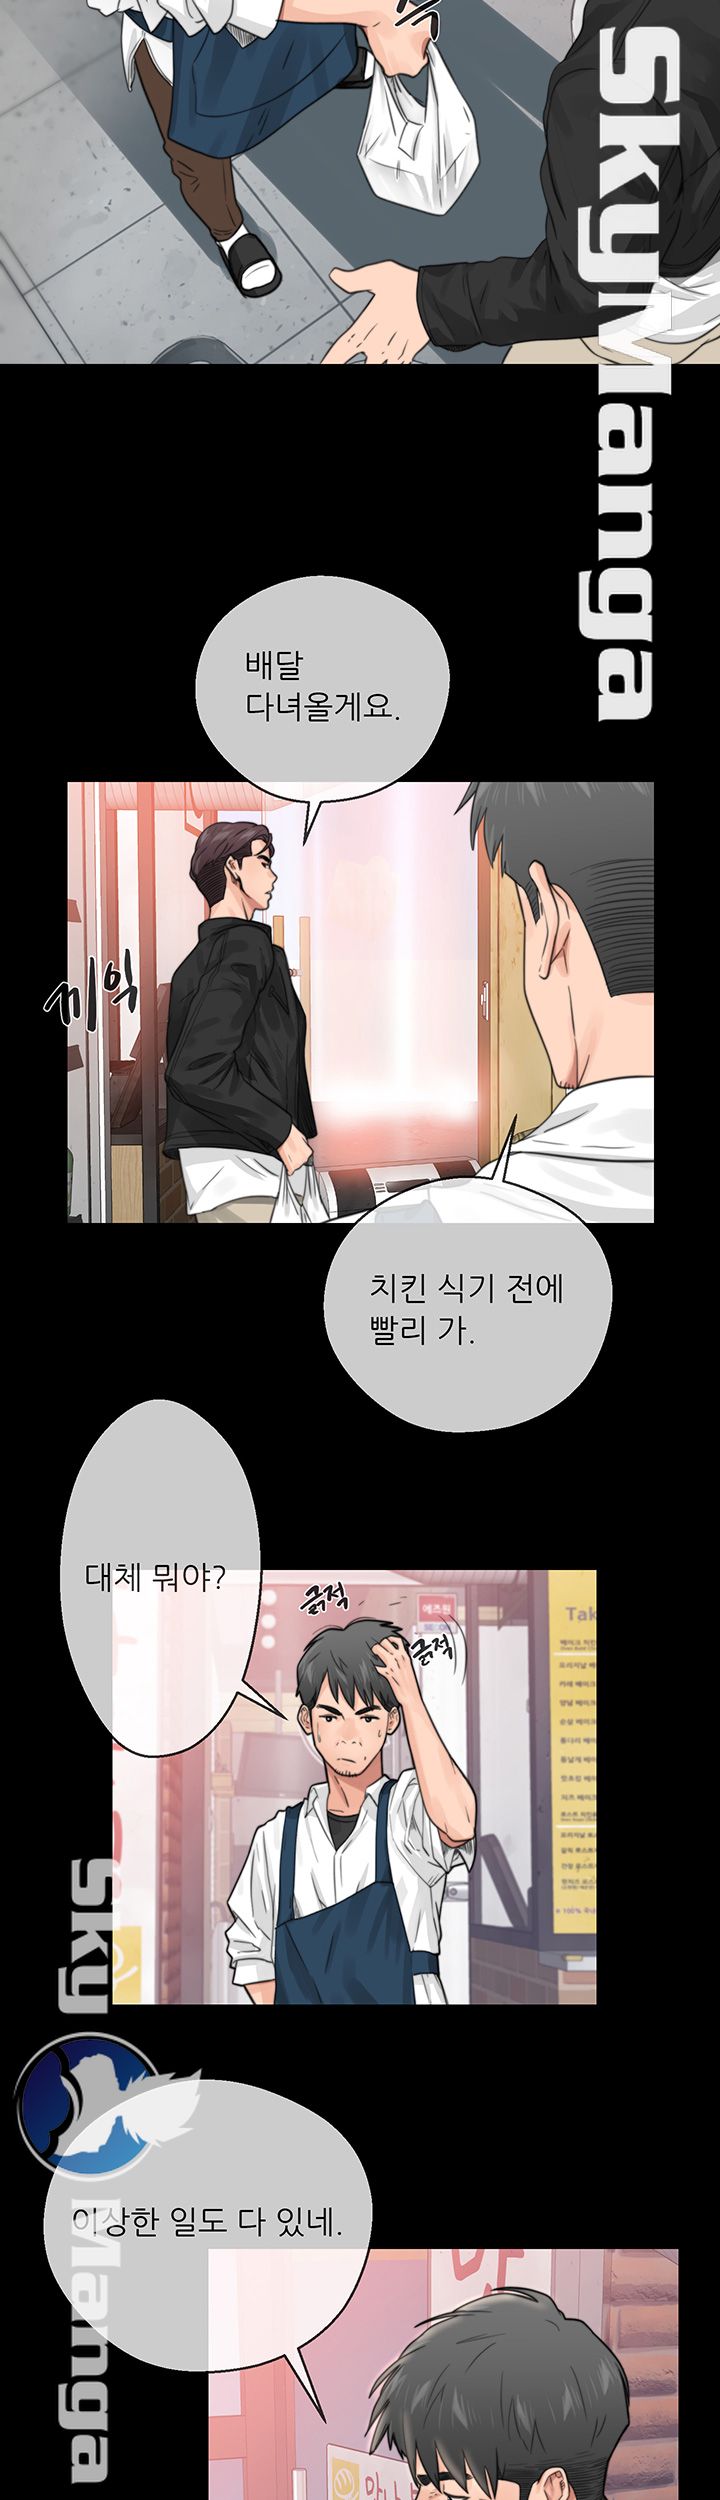 Youthful Raw - Chapter 1 Page 21